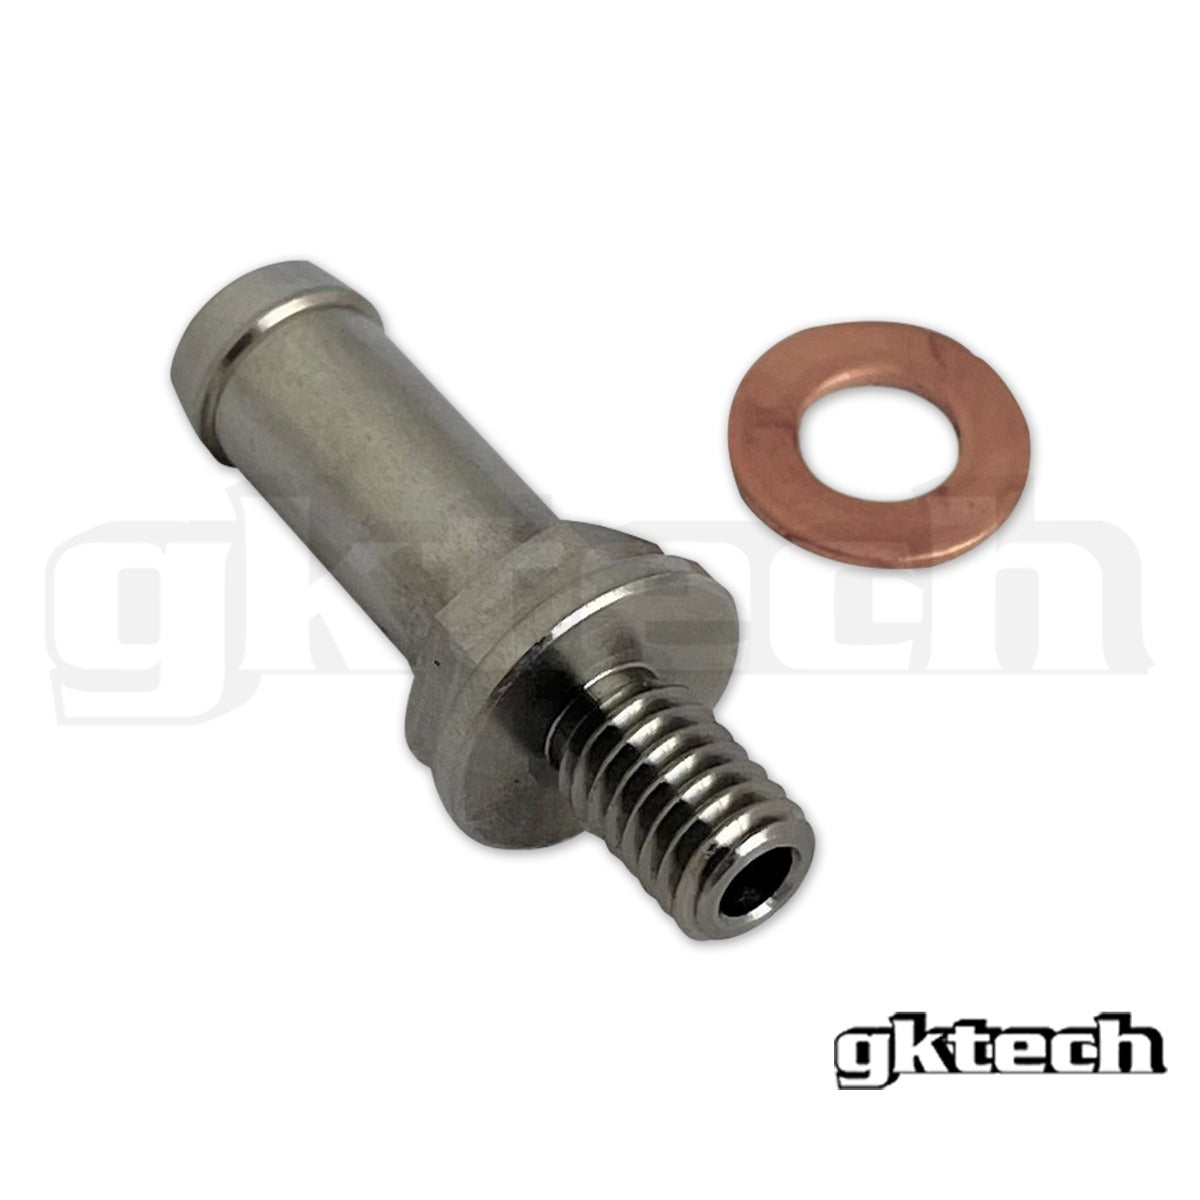 M6x1.0 to 8mm barbed fitting